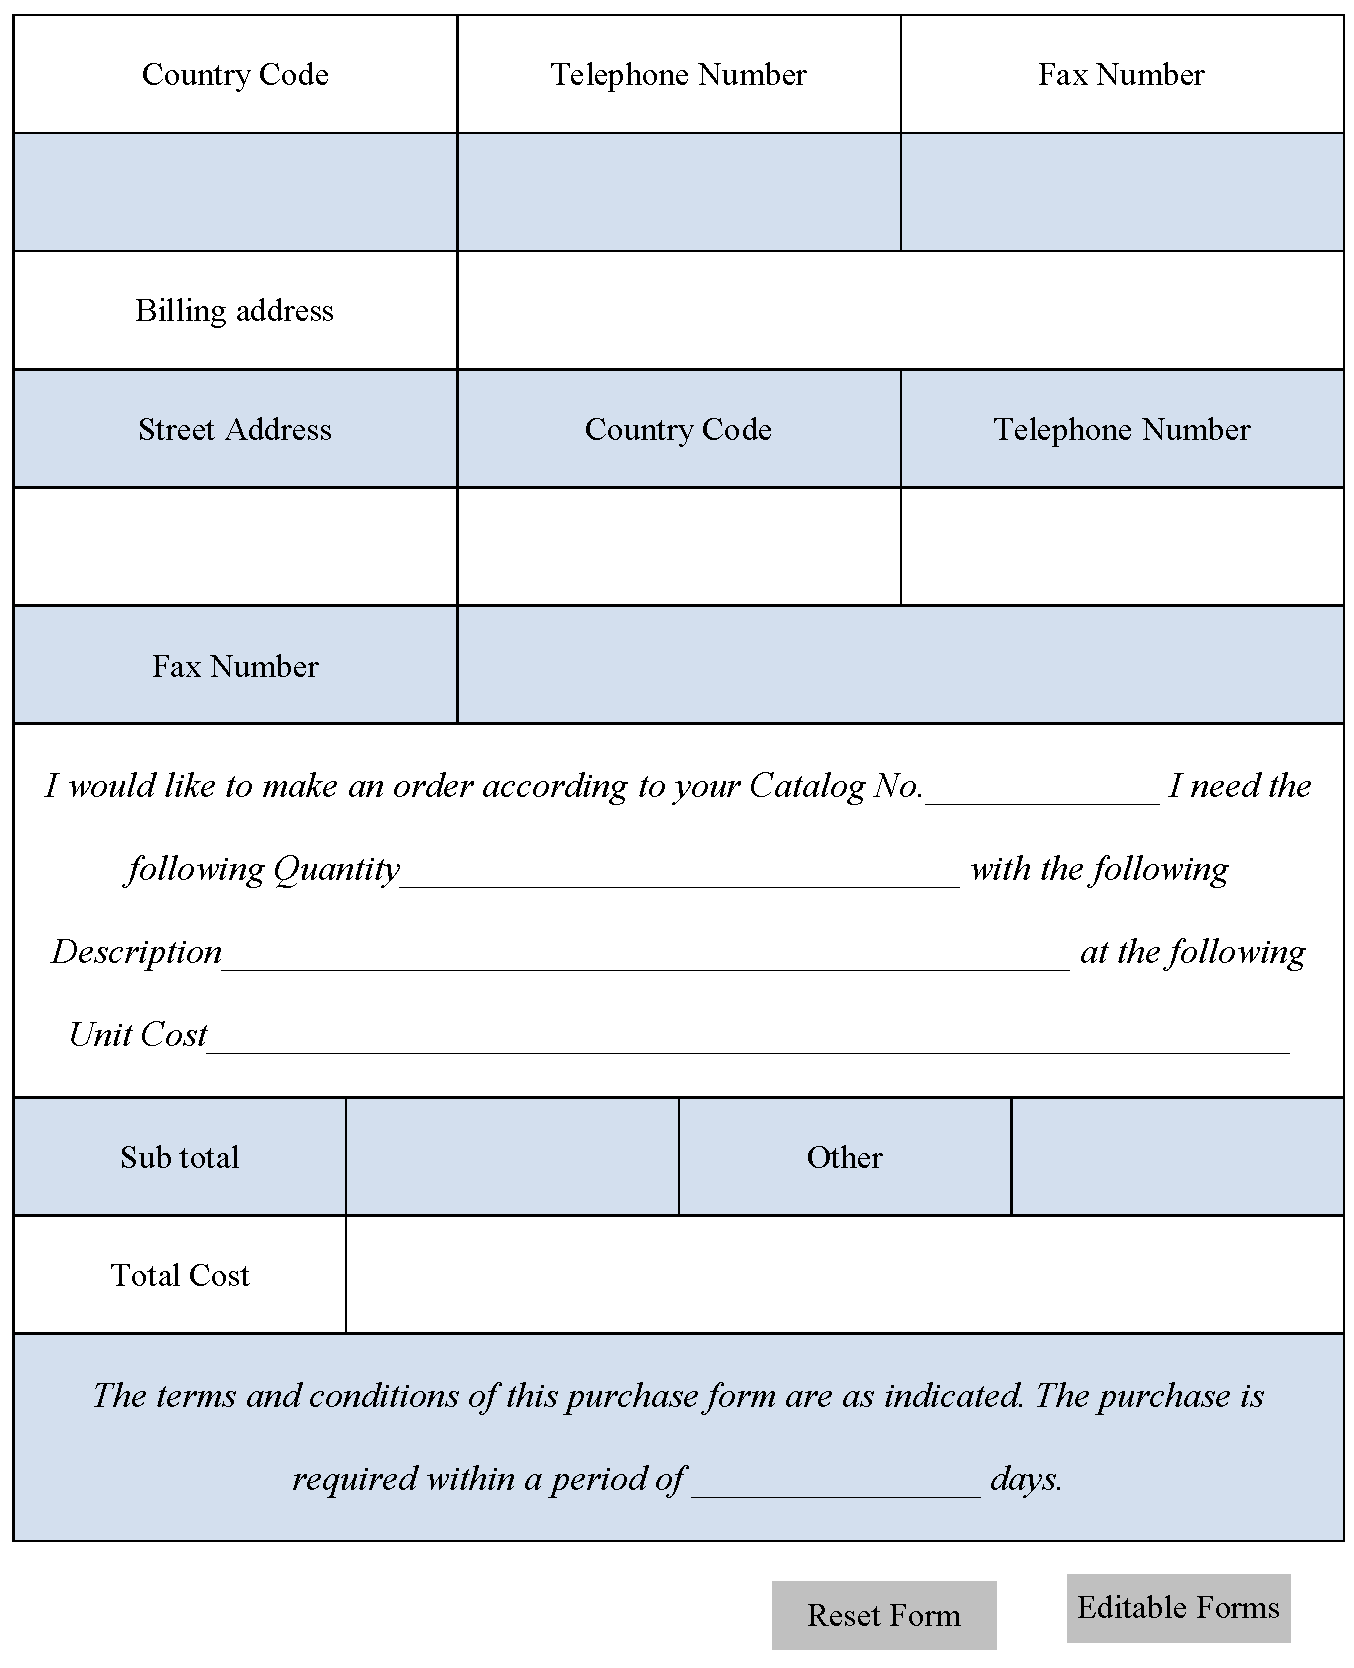 Sample Purchase Form